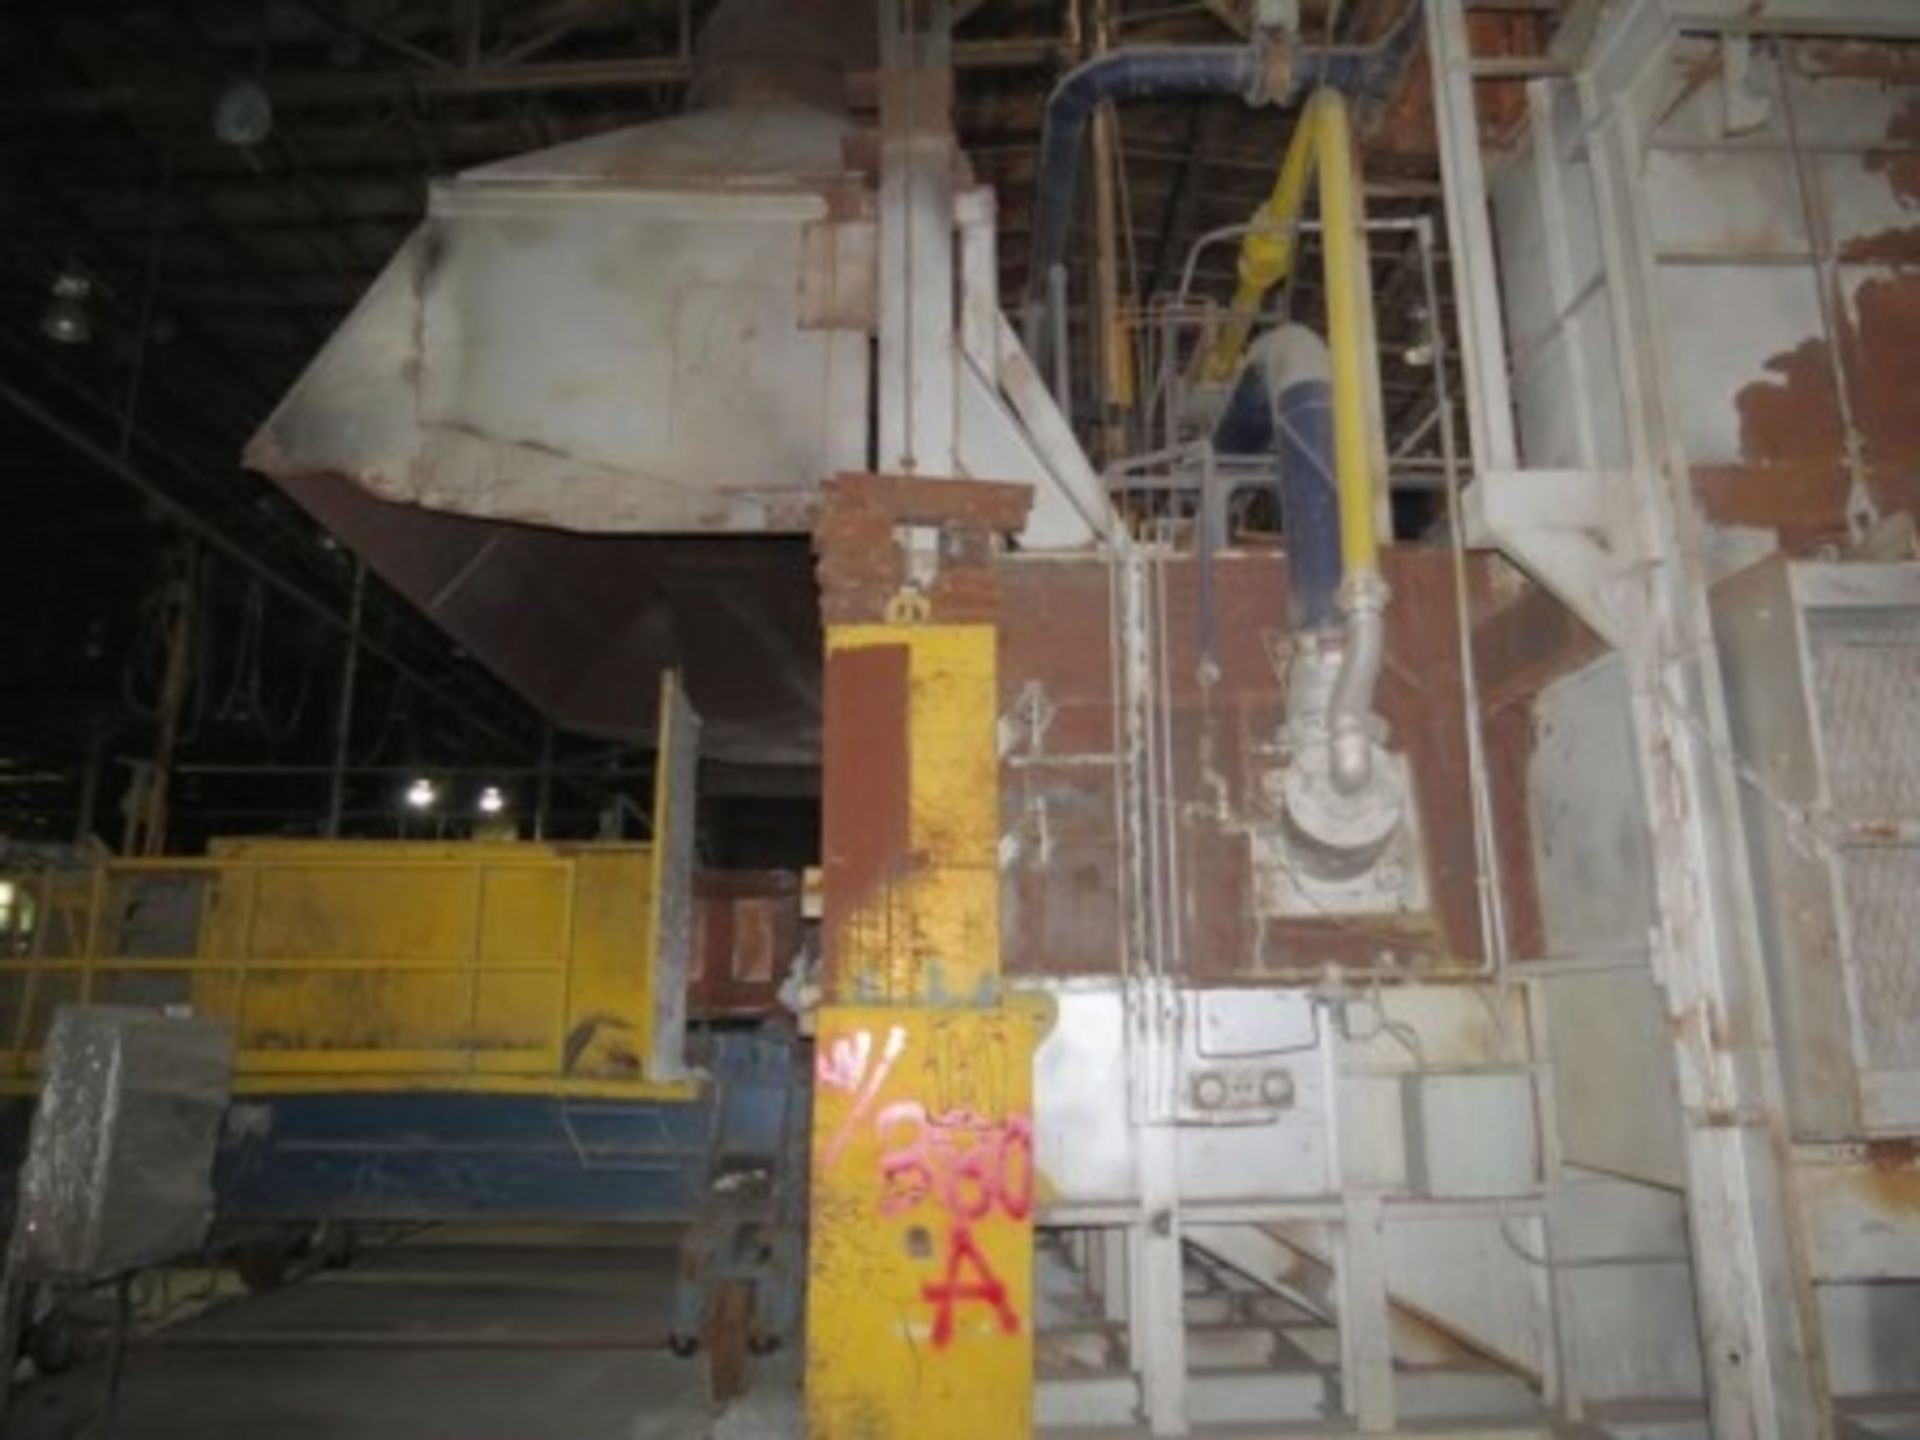 Melting furnace with dumper, hood and ductwork for gas extraction. - Image 13 of 28